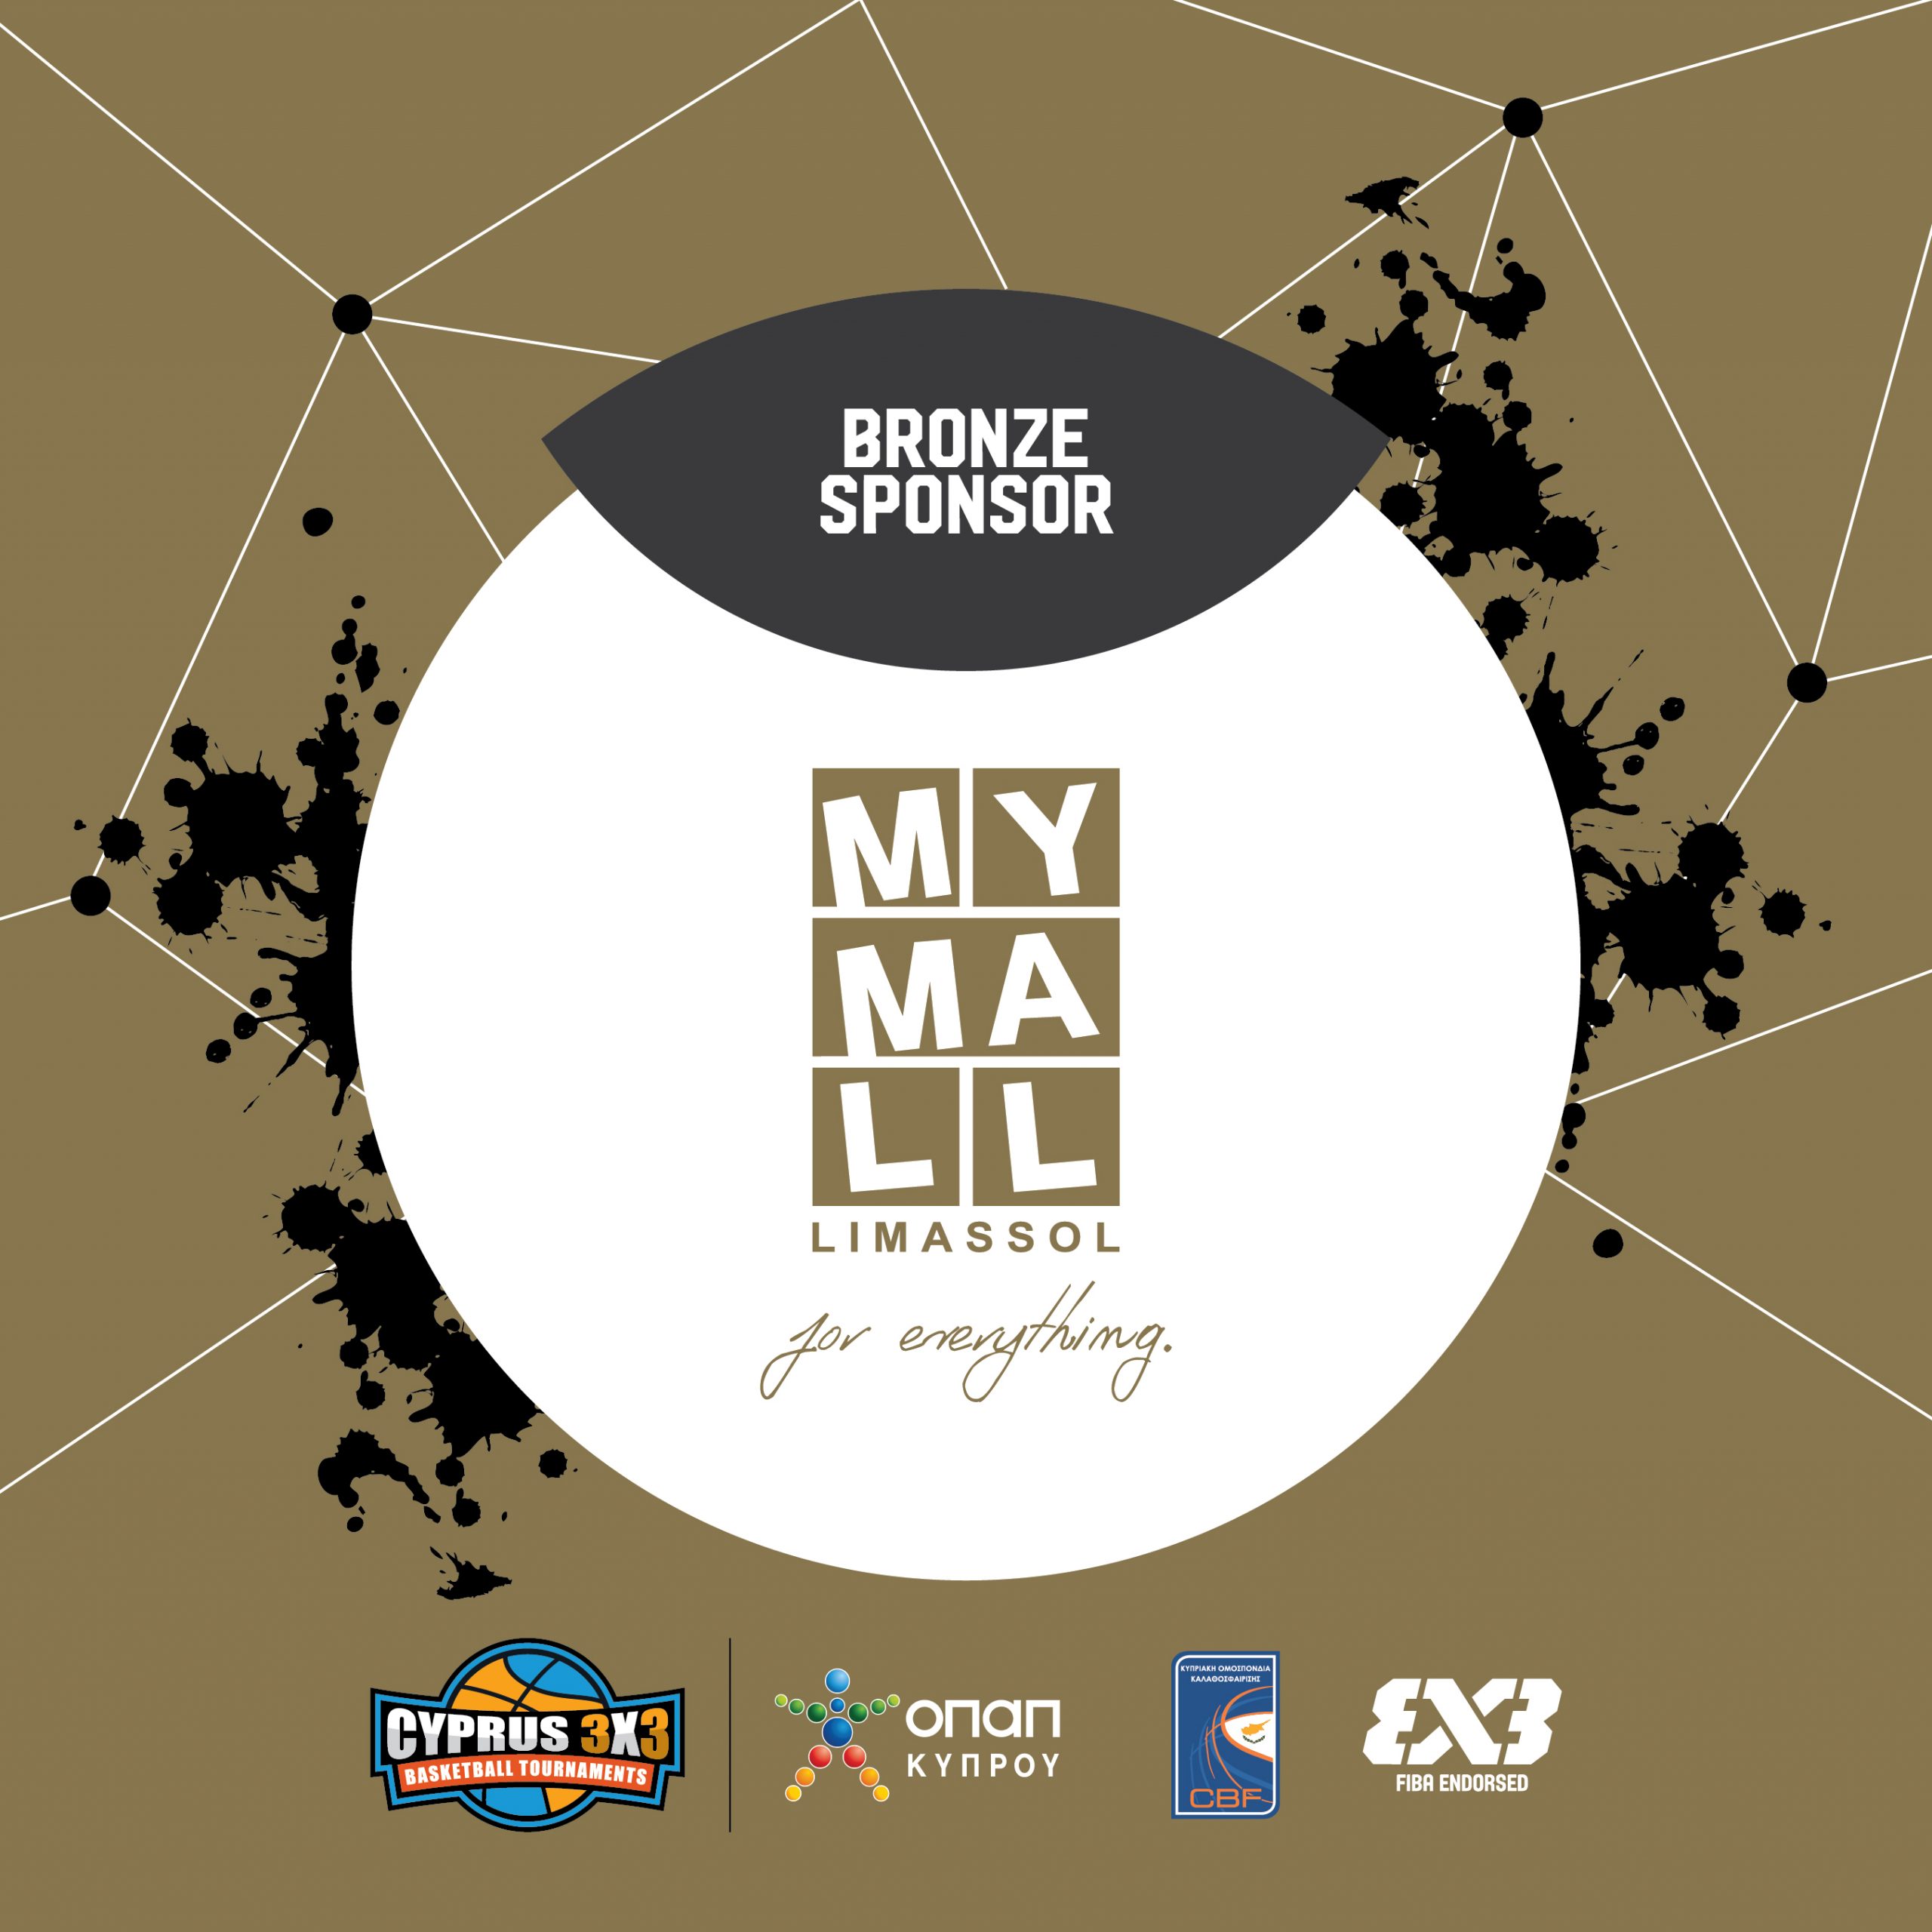 Limassol’s MYMALL Supports Cyprus 3×3 as Bronze Sponsor